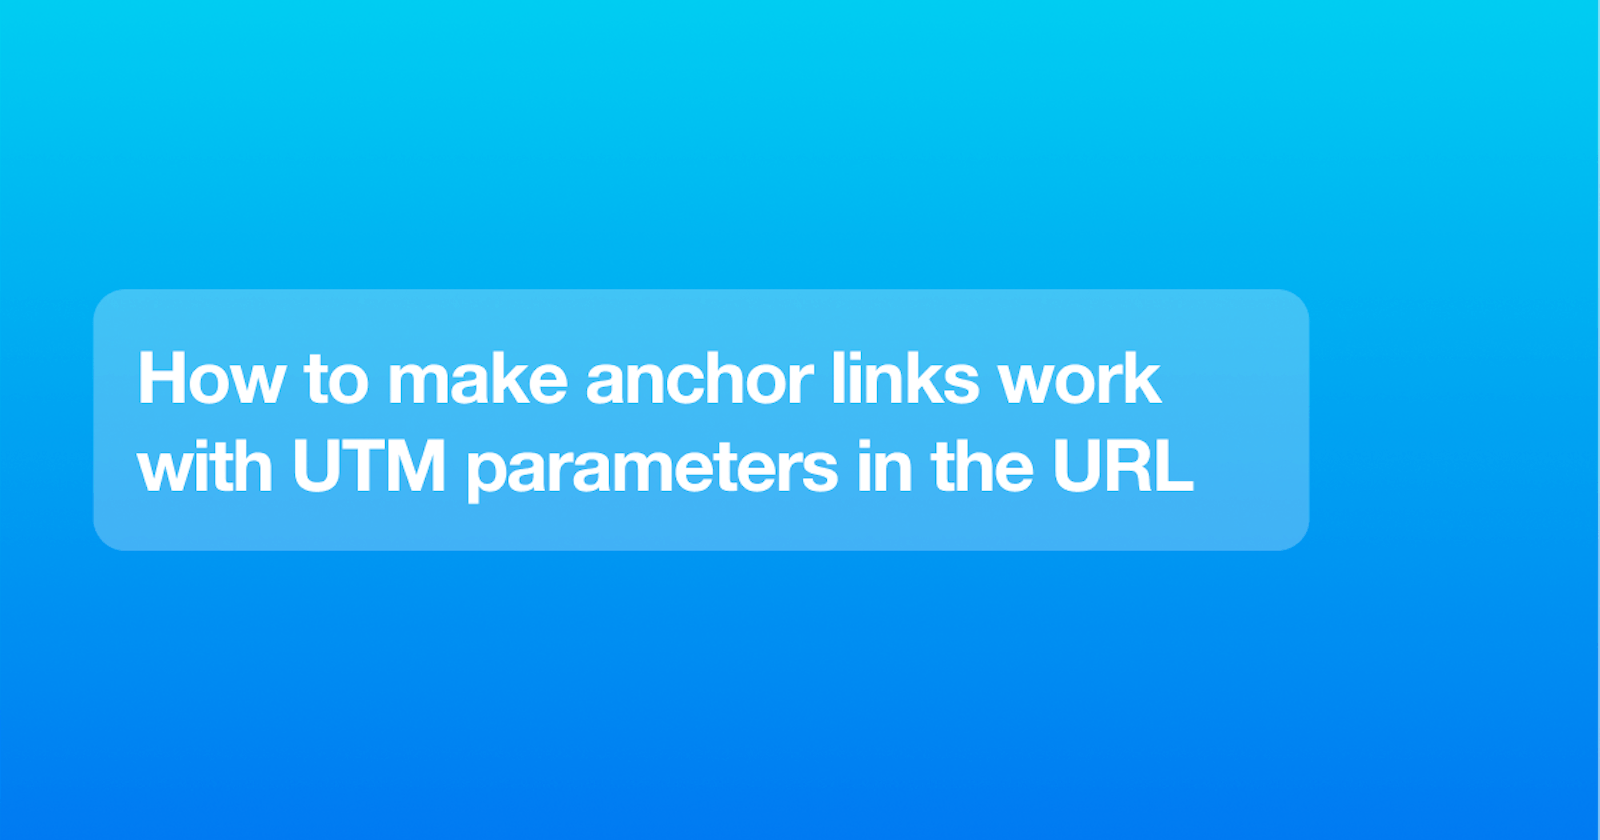 How to make anchor links work with UTM parameters in the URL